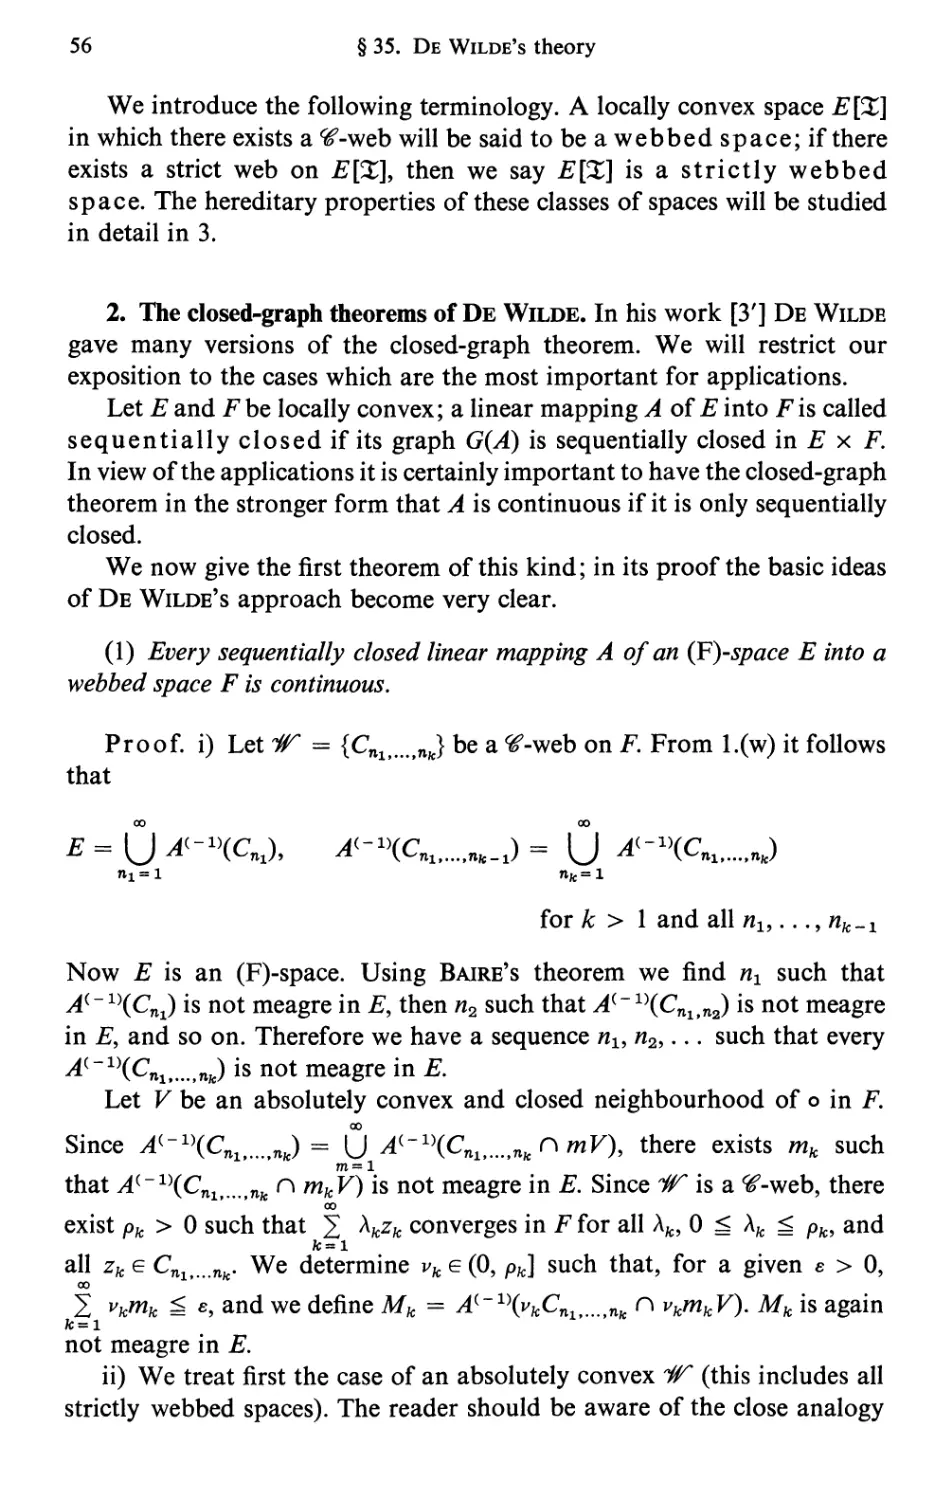 2. The closed-graph theorems of De Wilde